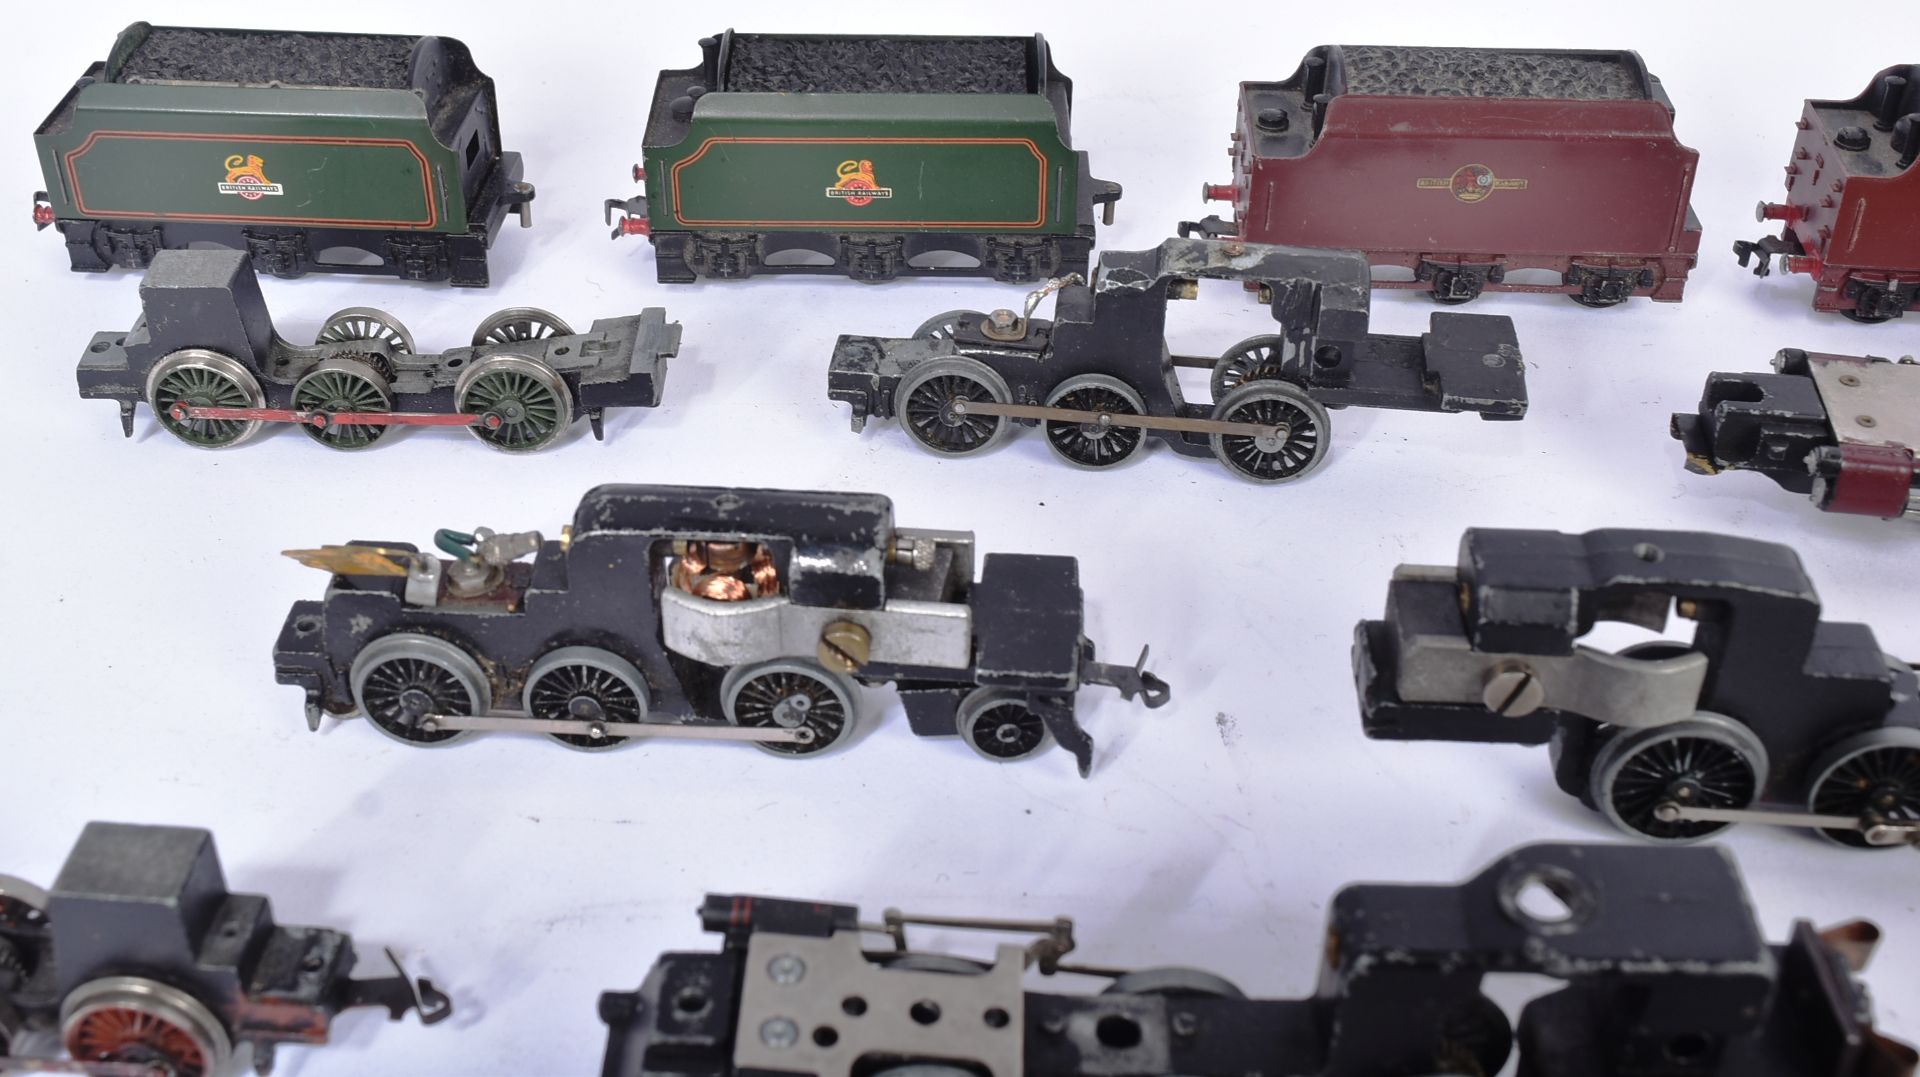 MODEL RAILWAY - COLLECTION OF OO GAUGE LOCOMOTIVE ENGINE SPARE PARTS - Image 2 of 6